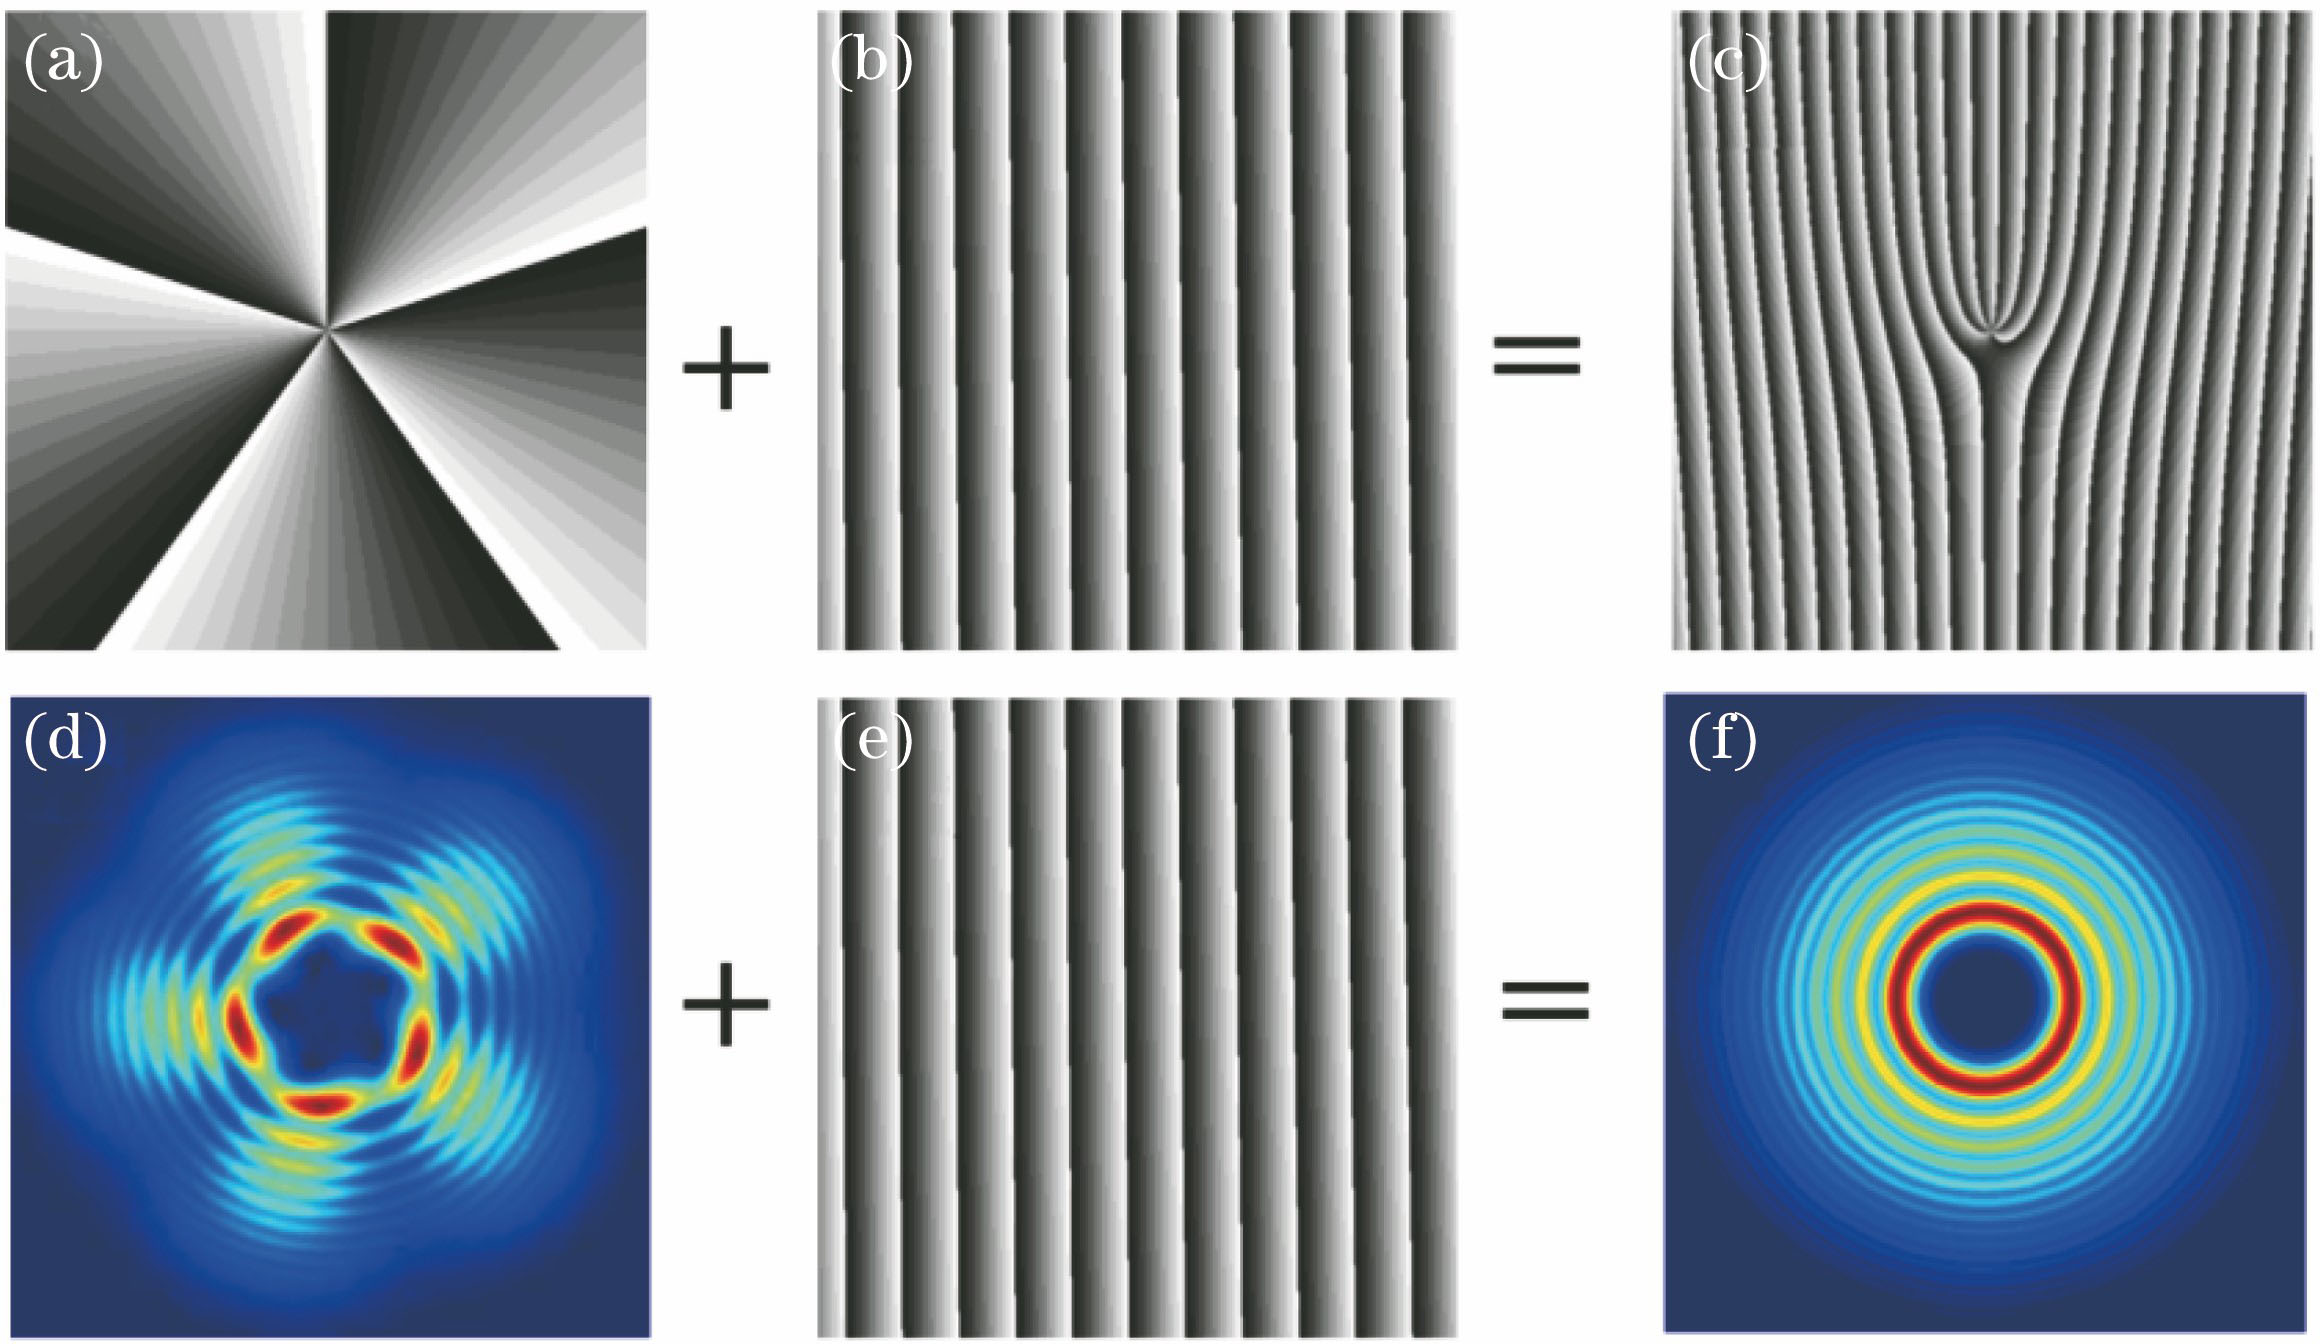 Schematic of generation of interference mode. (a) Spiral phase plate corresponding to LG05 beam; (b) strip diffraction grating; (c) fork grating; (d) interference petal pattern of LG05 beam; (e) circular LG05 beam